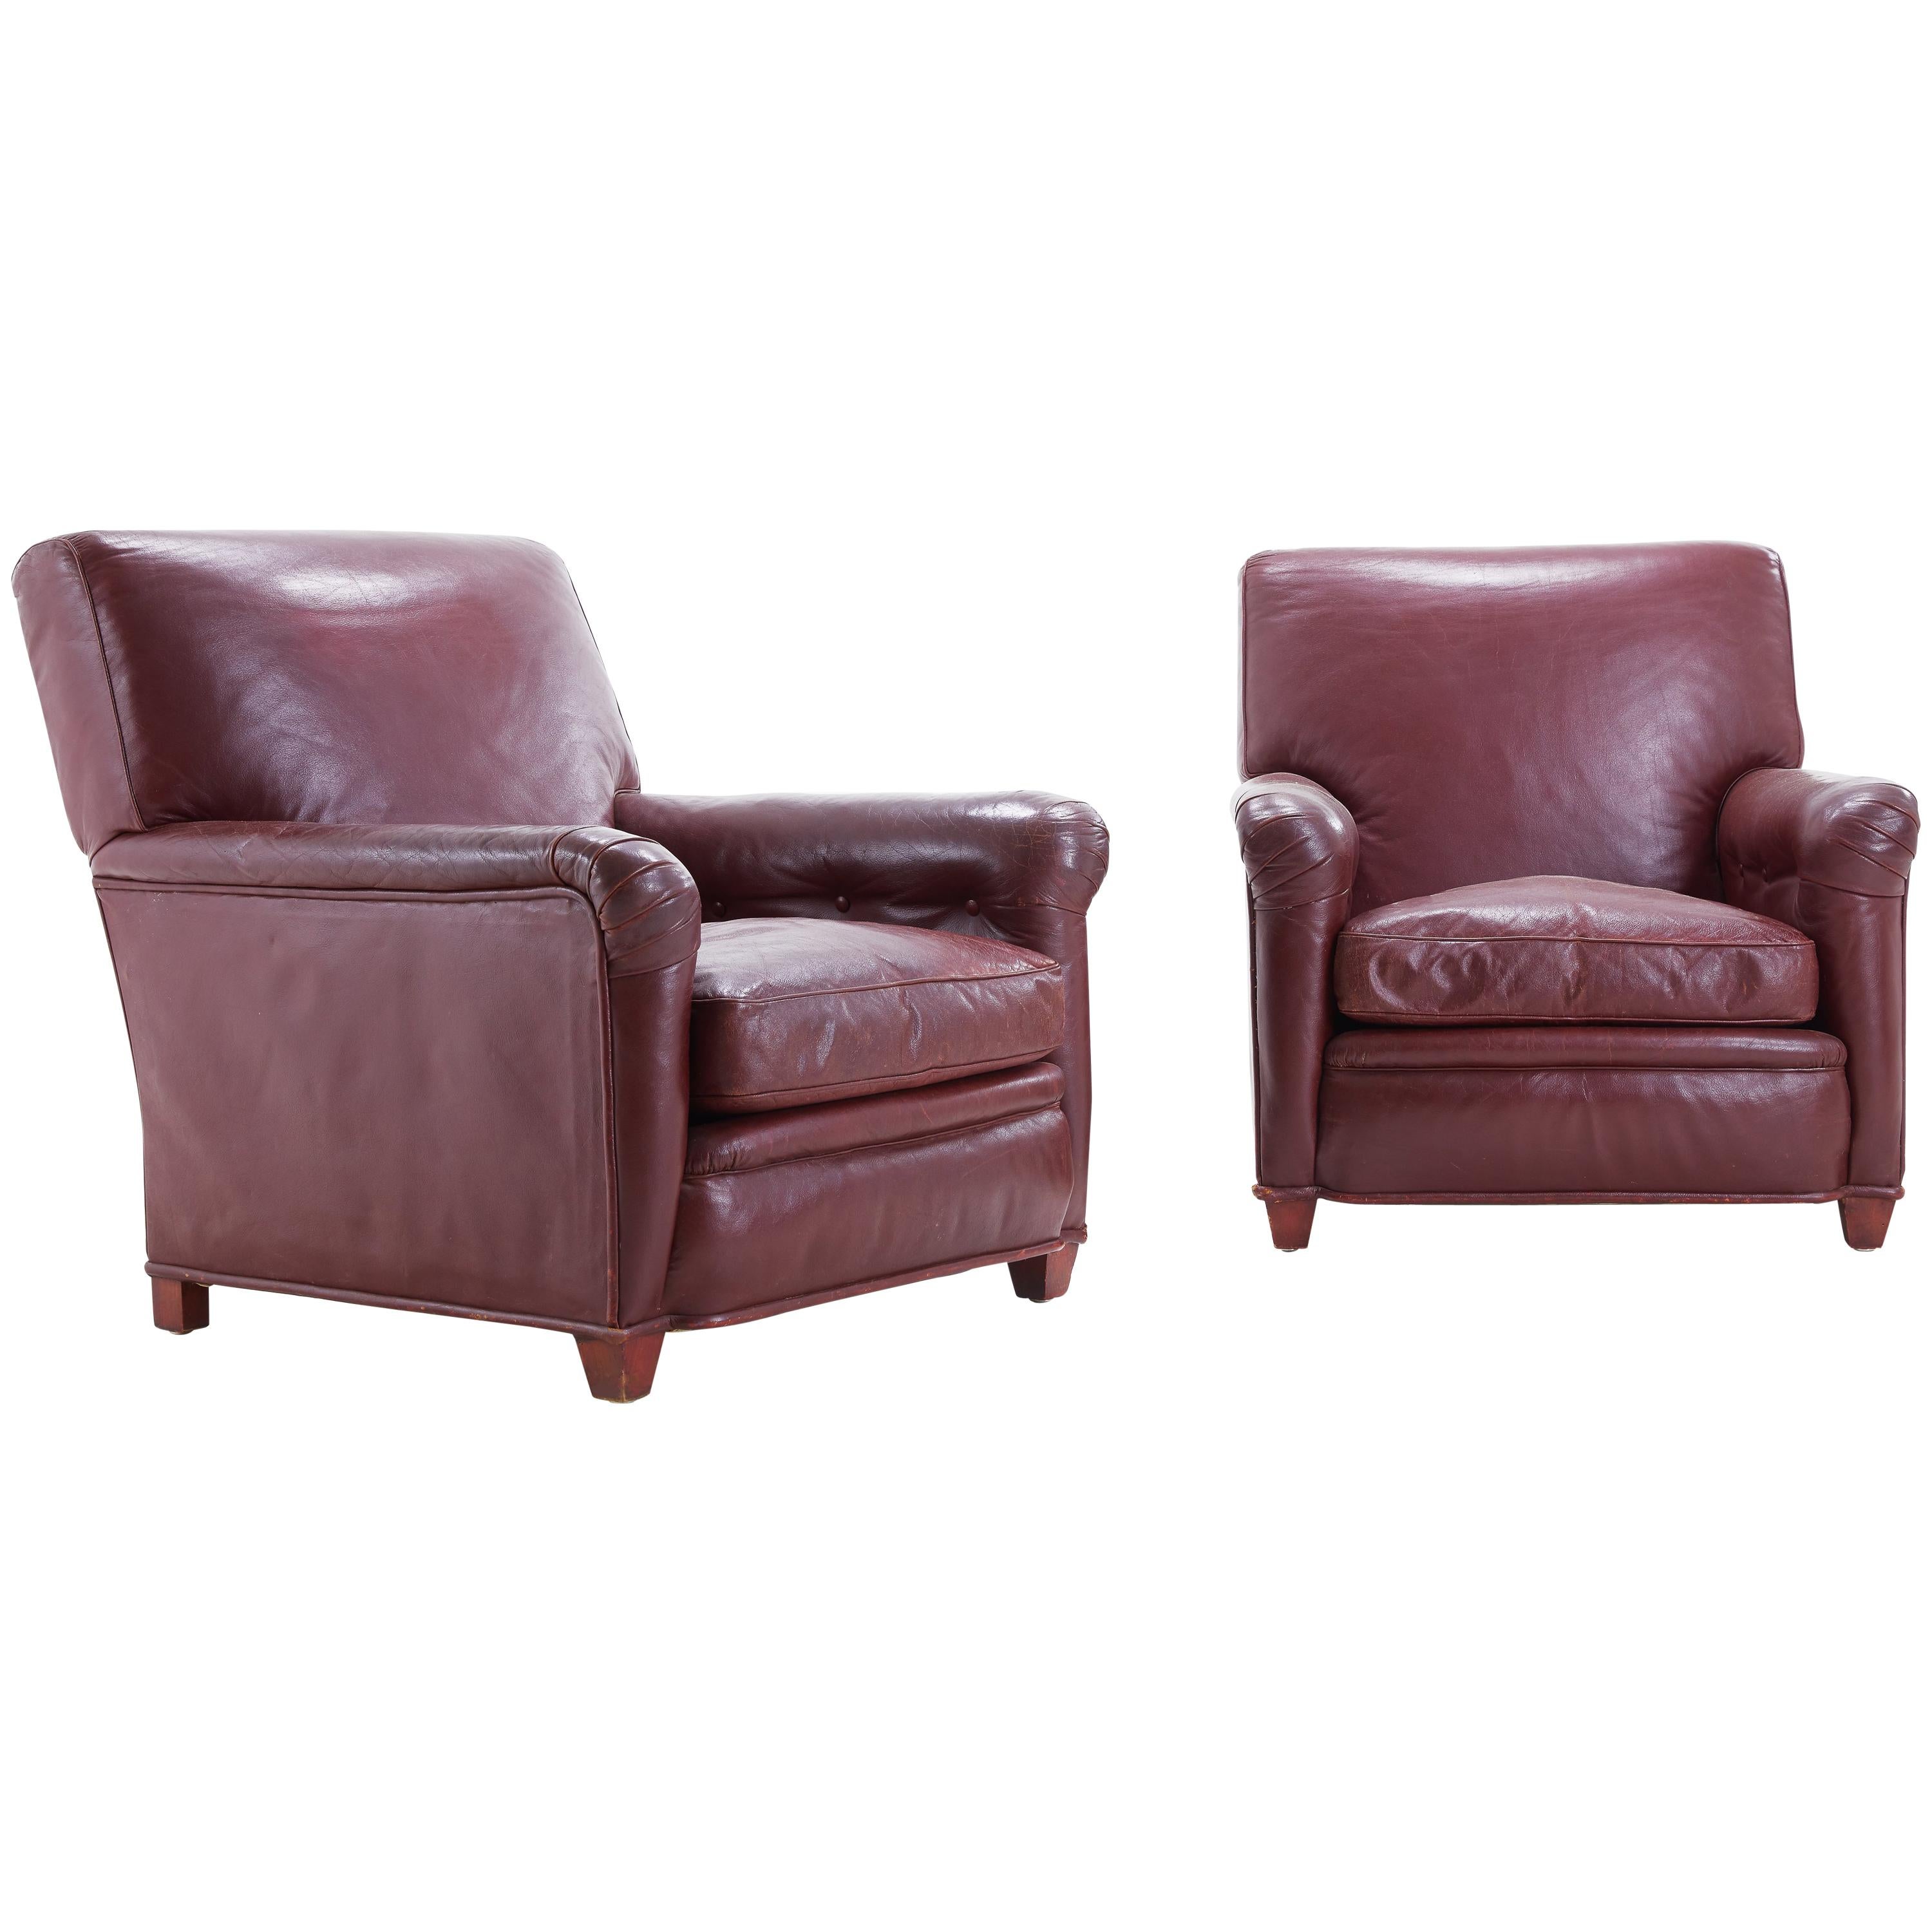 Large Scale Pair of Red Leather Armchairs